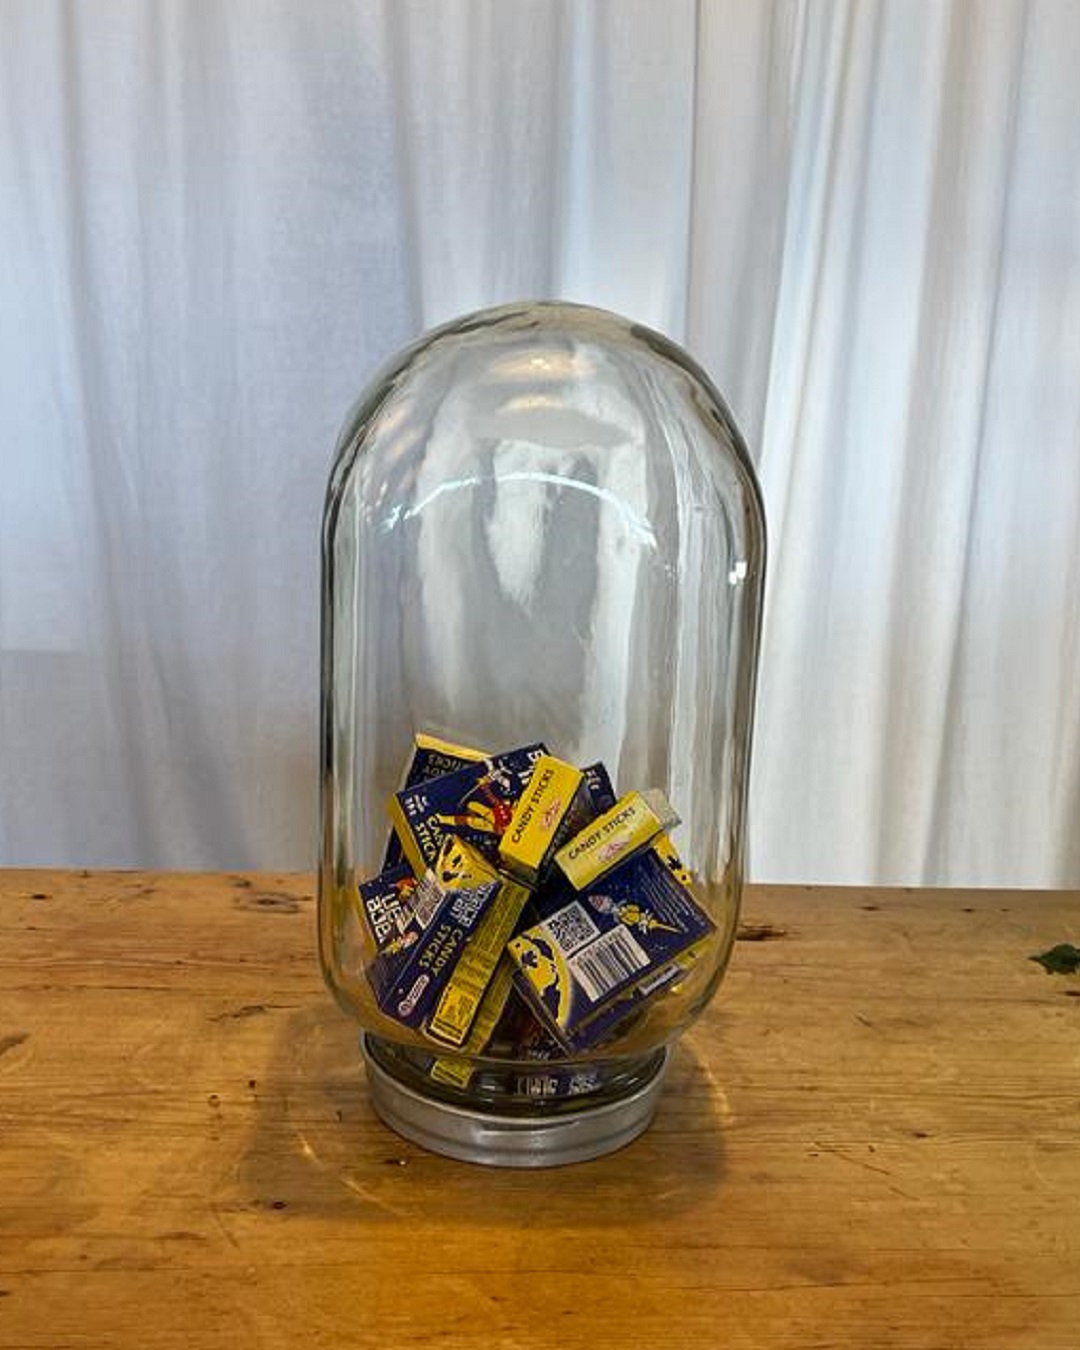 Vintage glass jar with lid and lollies inside